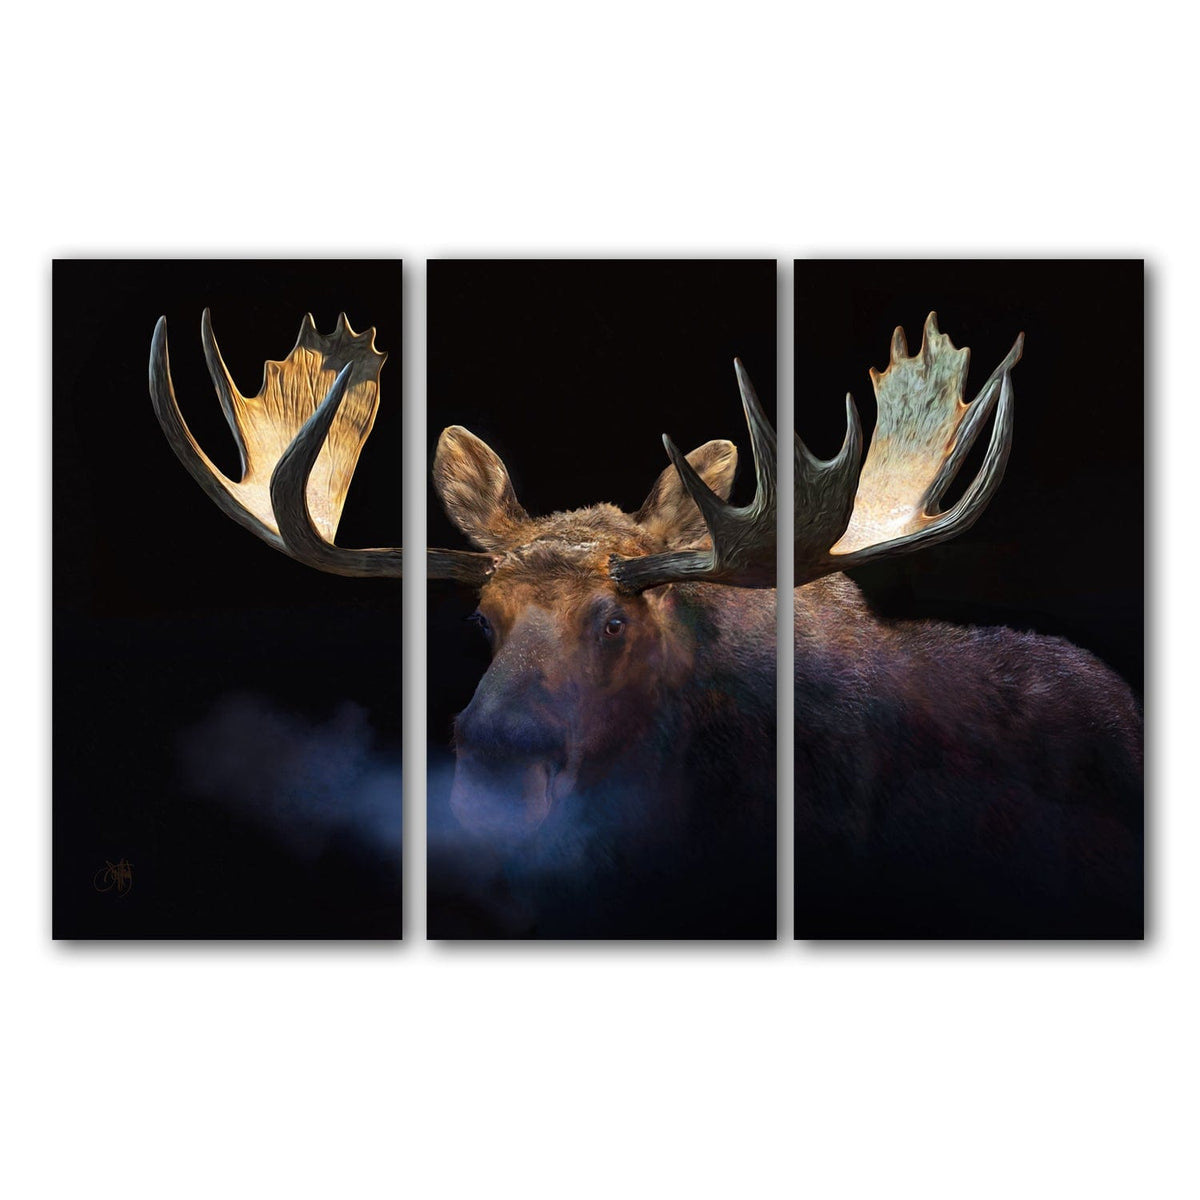 Large canvas art panels - Nature canvas art of Bull Moose from Personal Prints